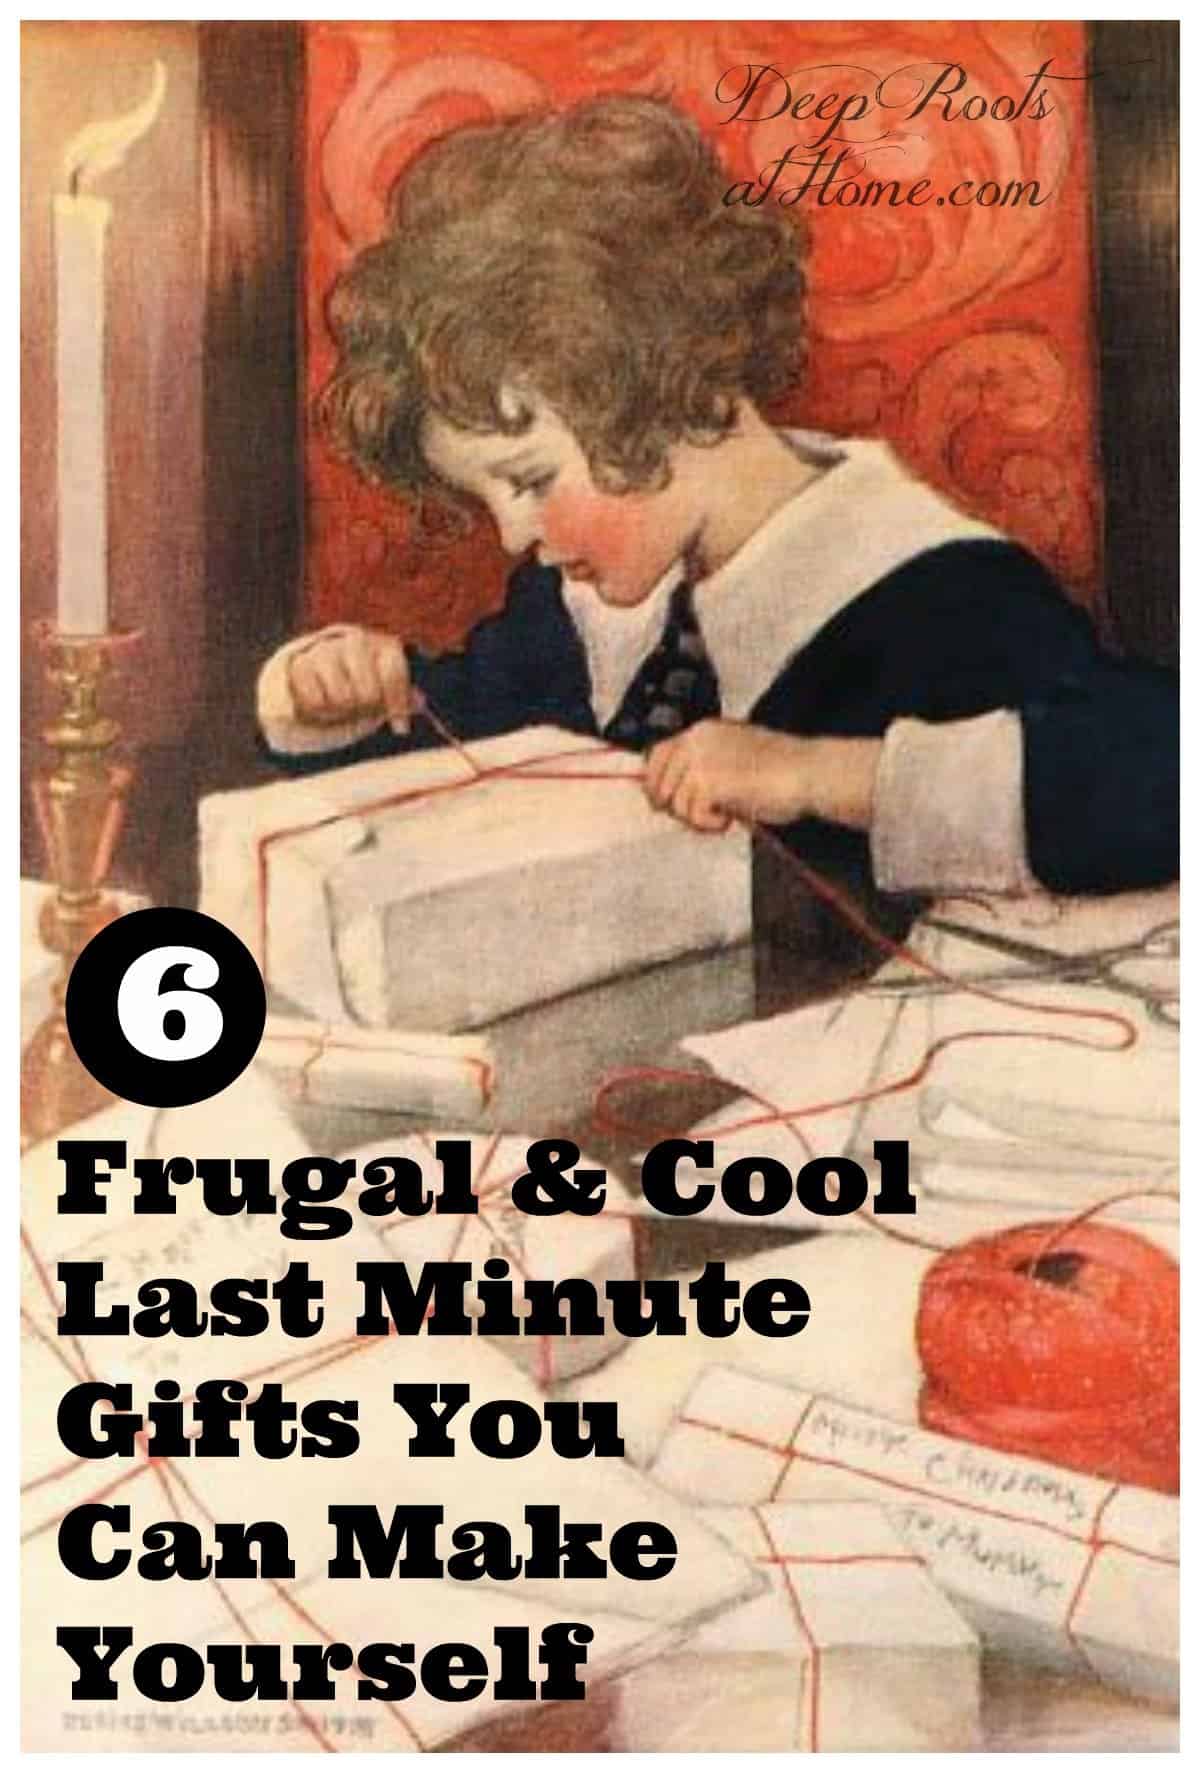 6 Frugal and Cool Last Minute Gifts You Can Make Yourself. Jessie Wilcox Smith artwork of a child wrapping gifts